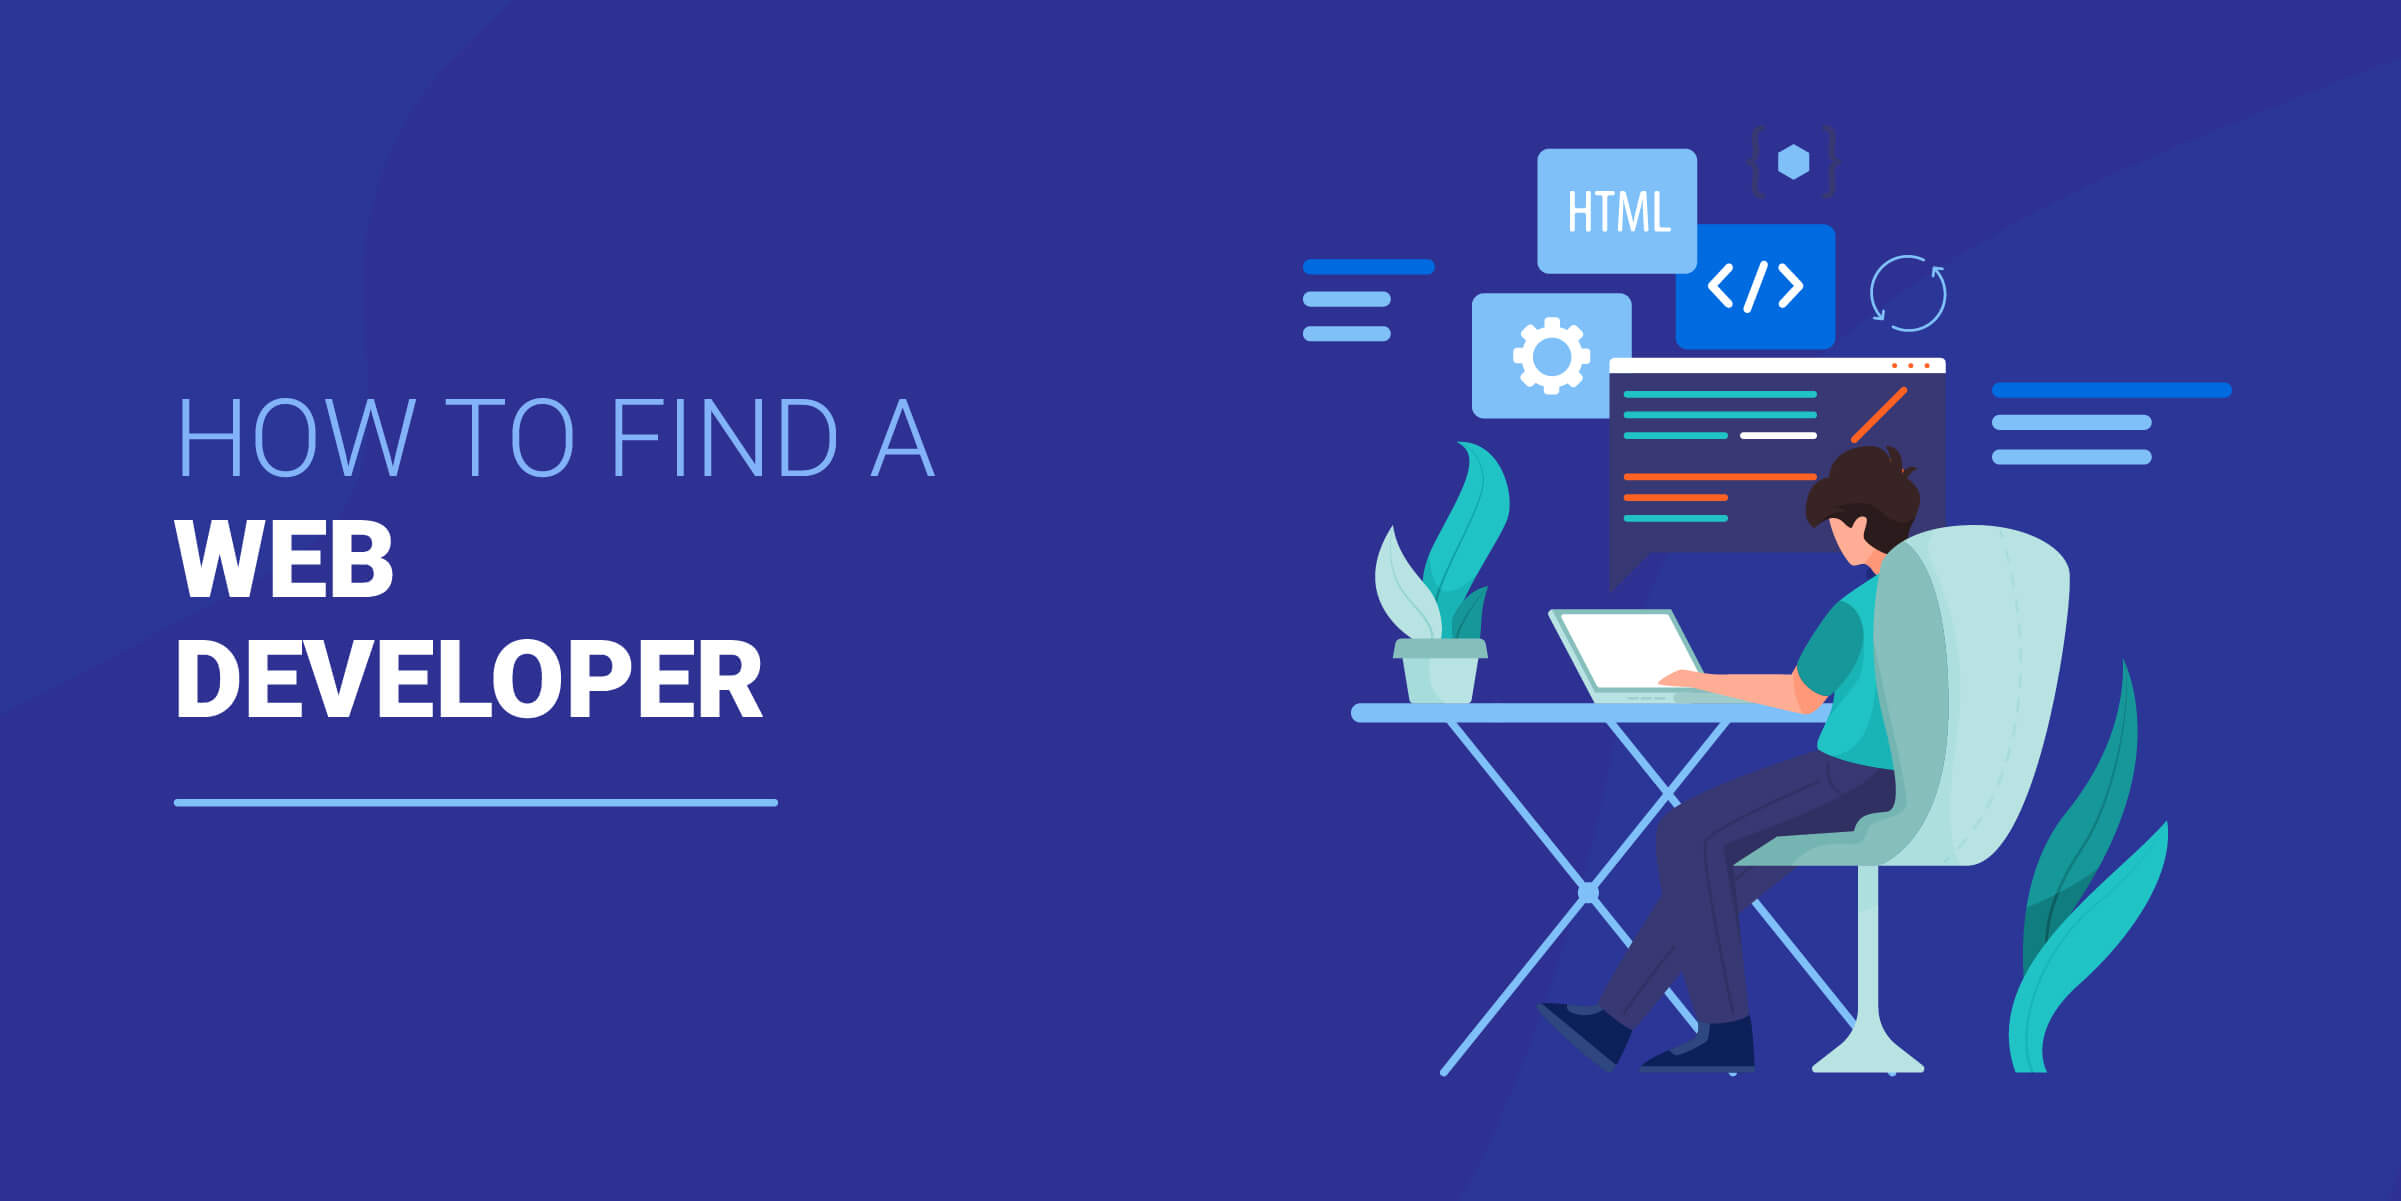 How to Find a Web Developer